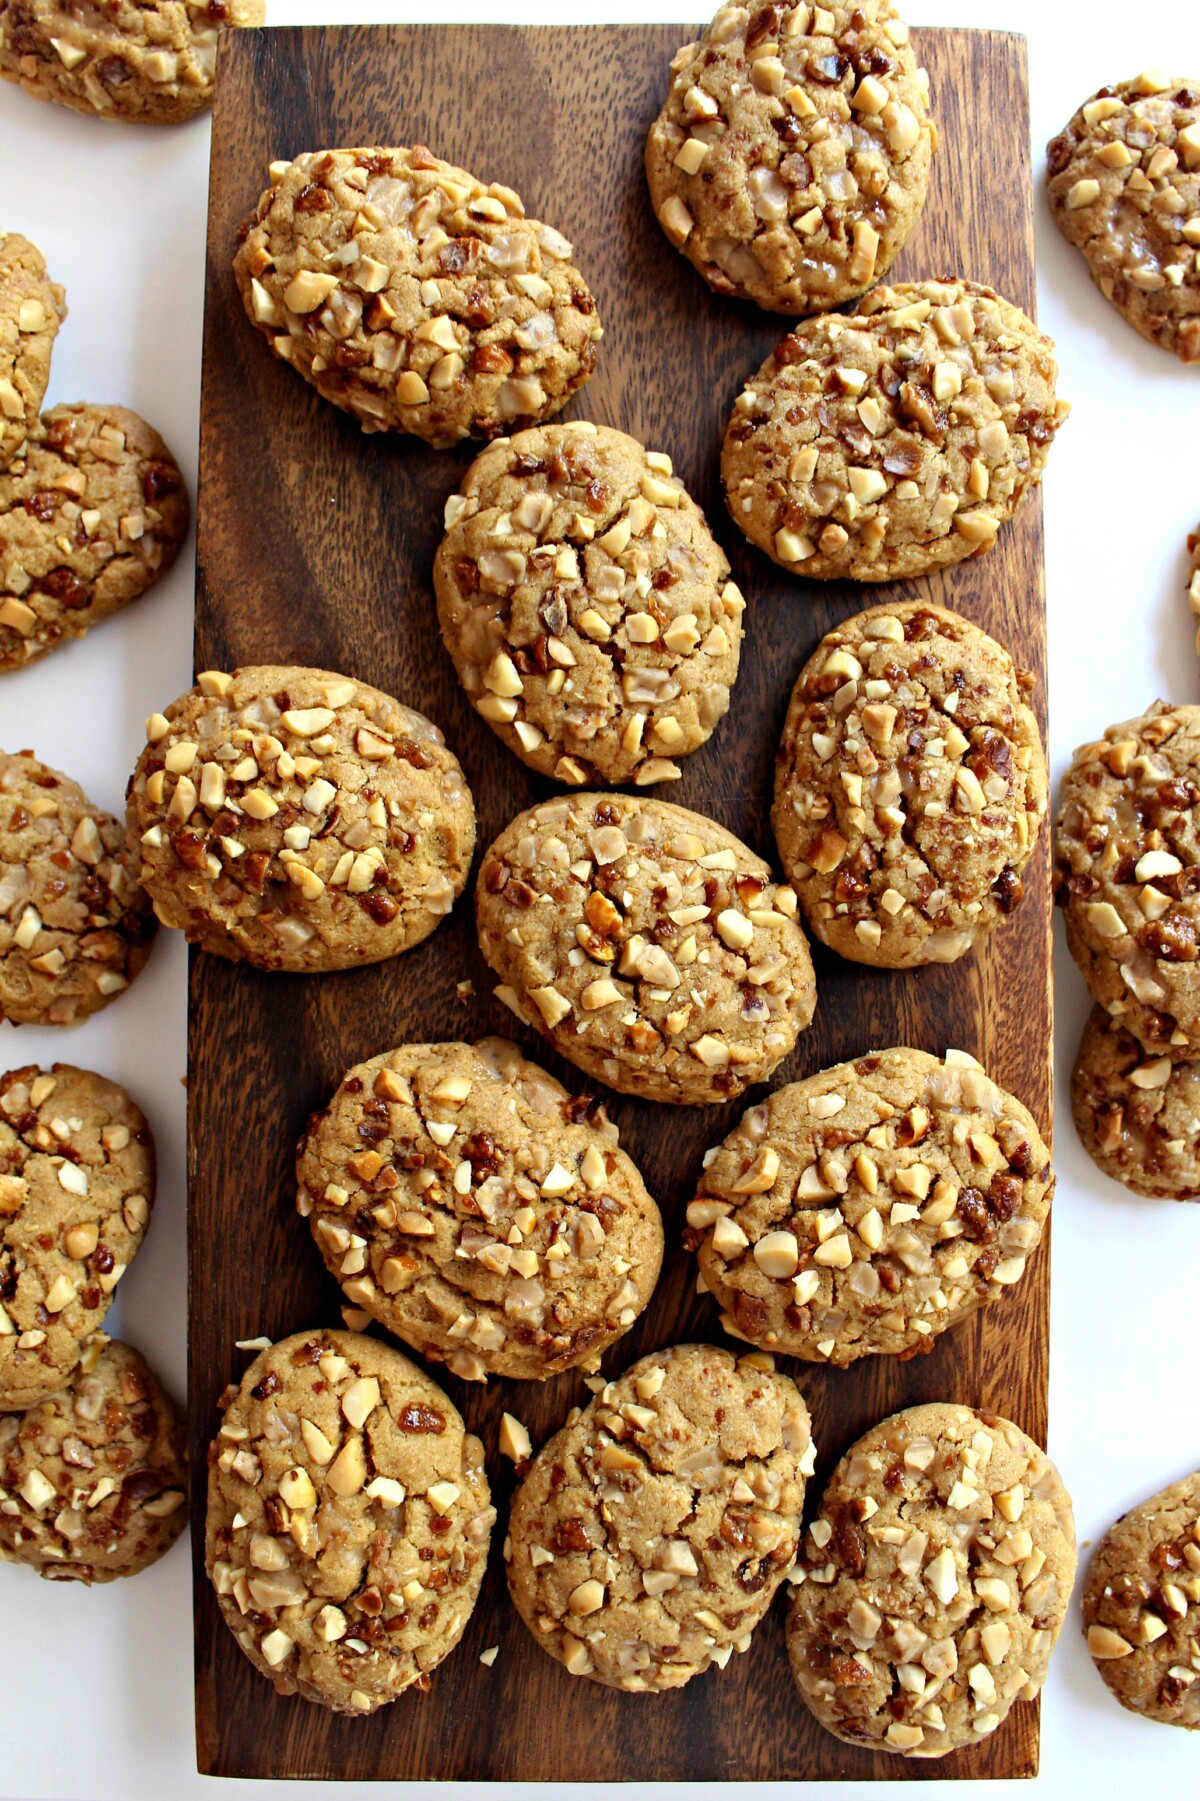 Toffee Peanut Cookies  coated in chopped peanuts, on a wooden cutting board.